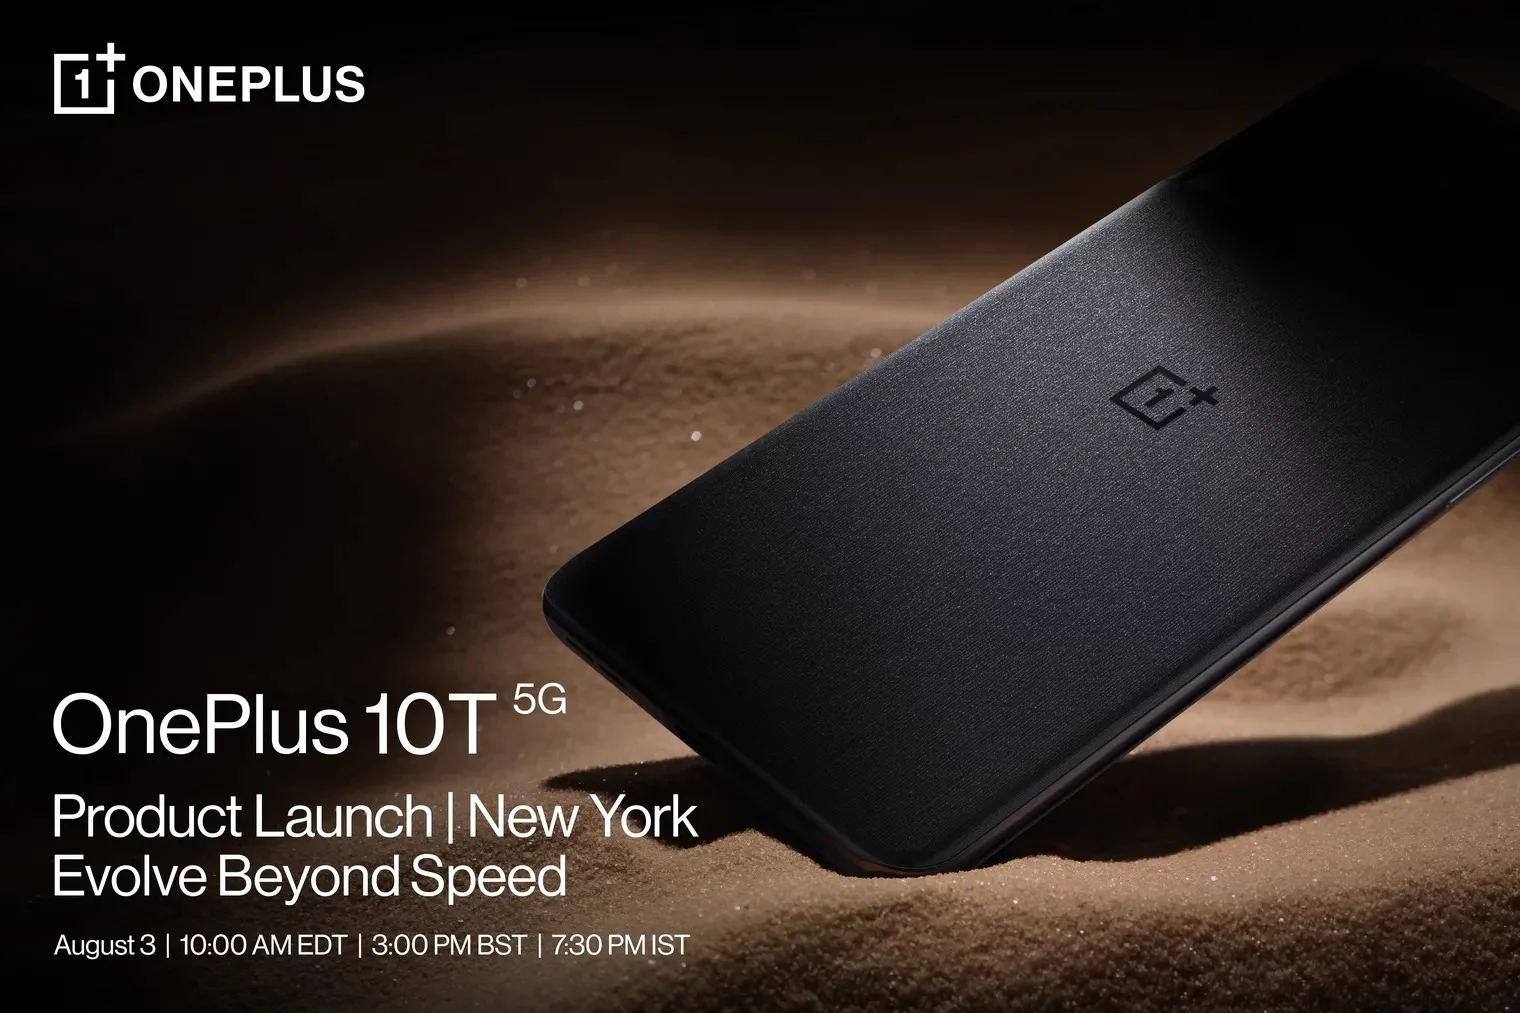 OnePlus 10T launching August 3.0